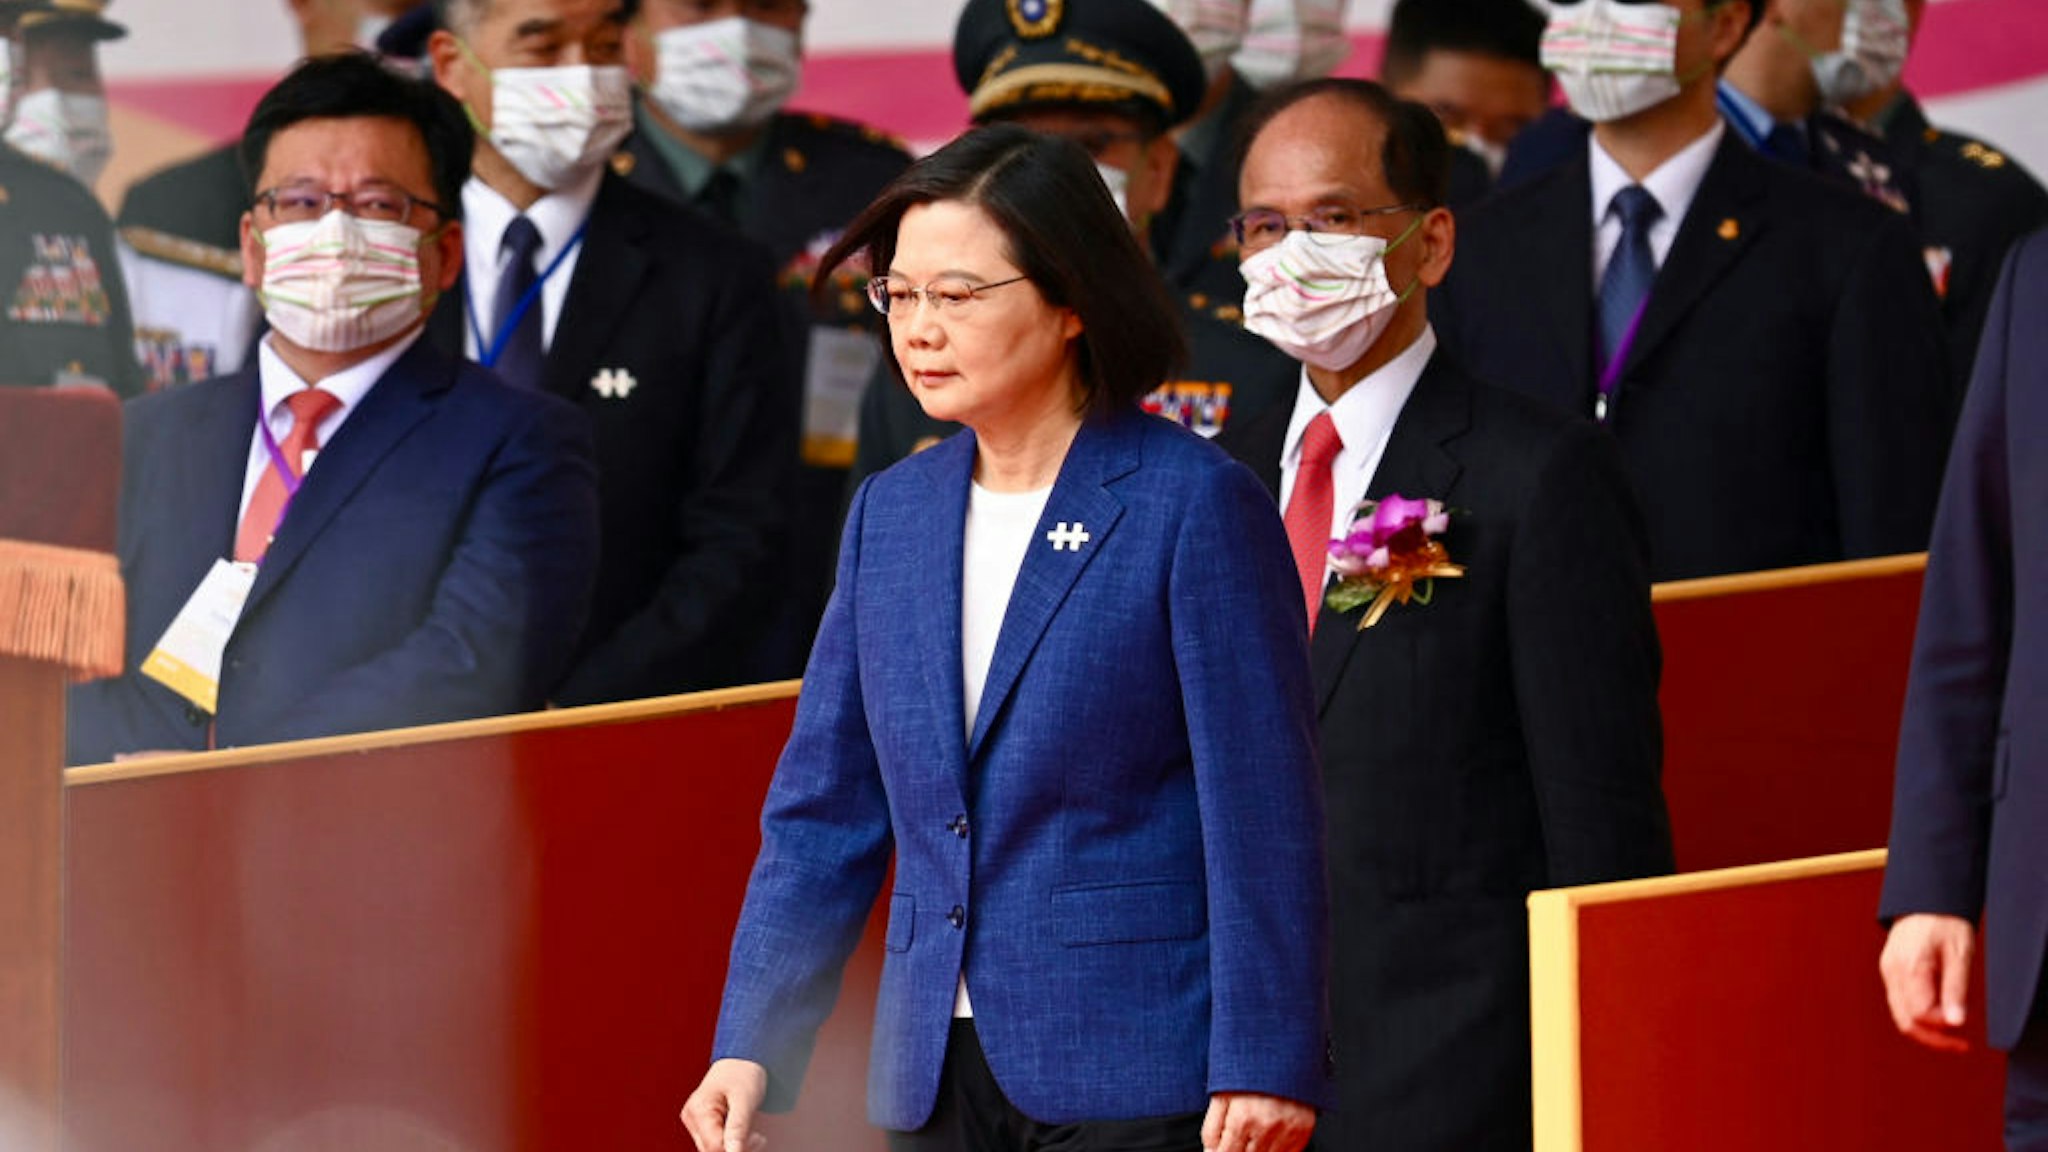 Taiwan's President Tsai Ing-wen attends national day celebrations in front of the Presidential Palace in Taipei on October 10, 2021.